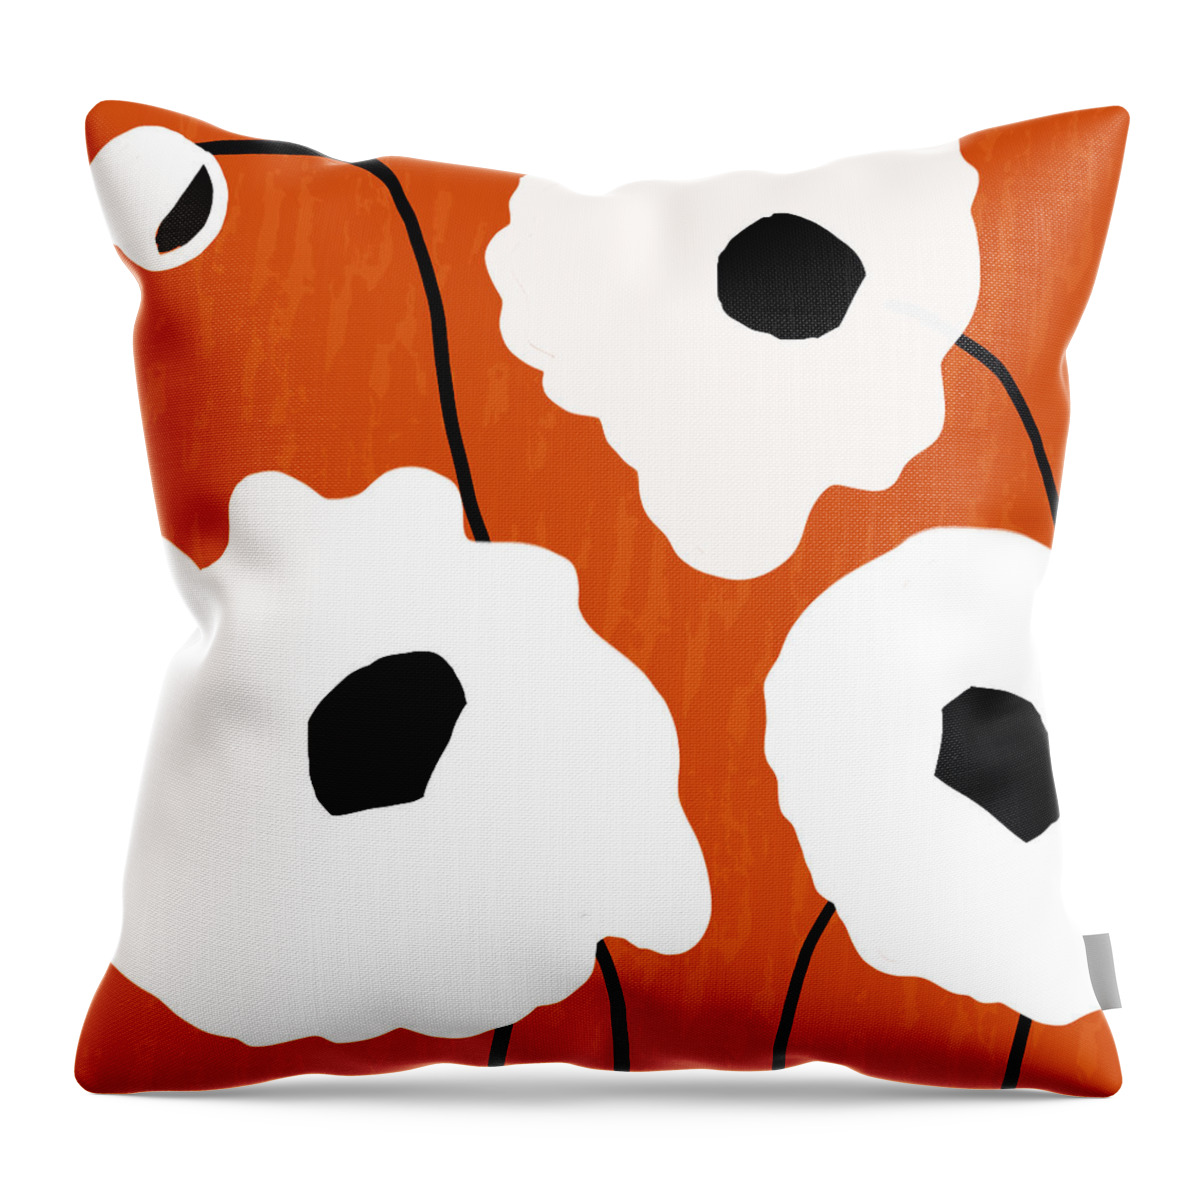 Orange Throw Pillow featuring the mixed media Mod Poppies Orange 2- Art by Linda Woods by Linda Woods